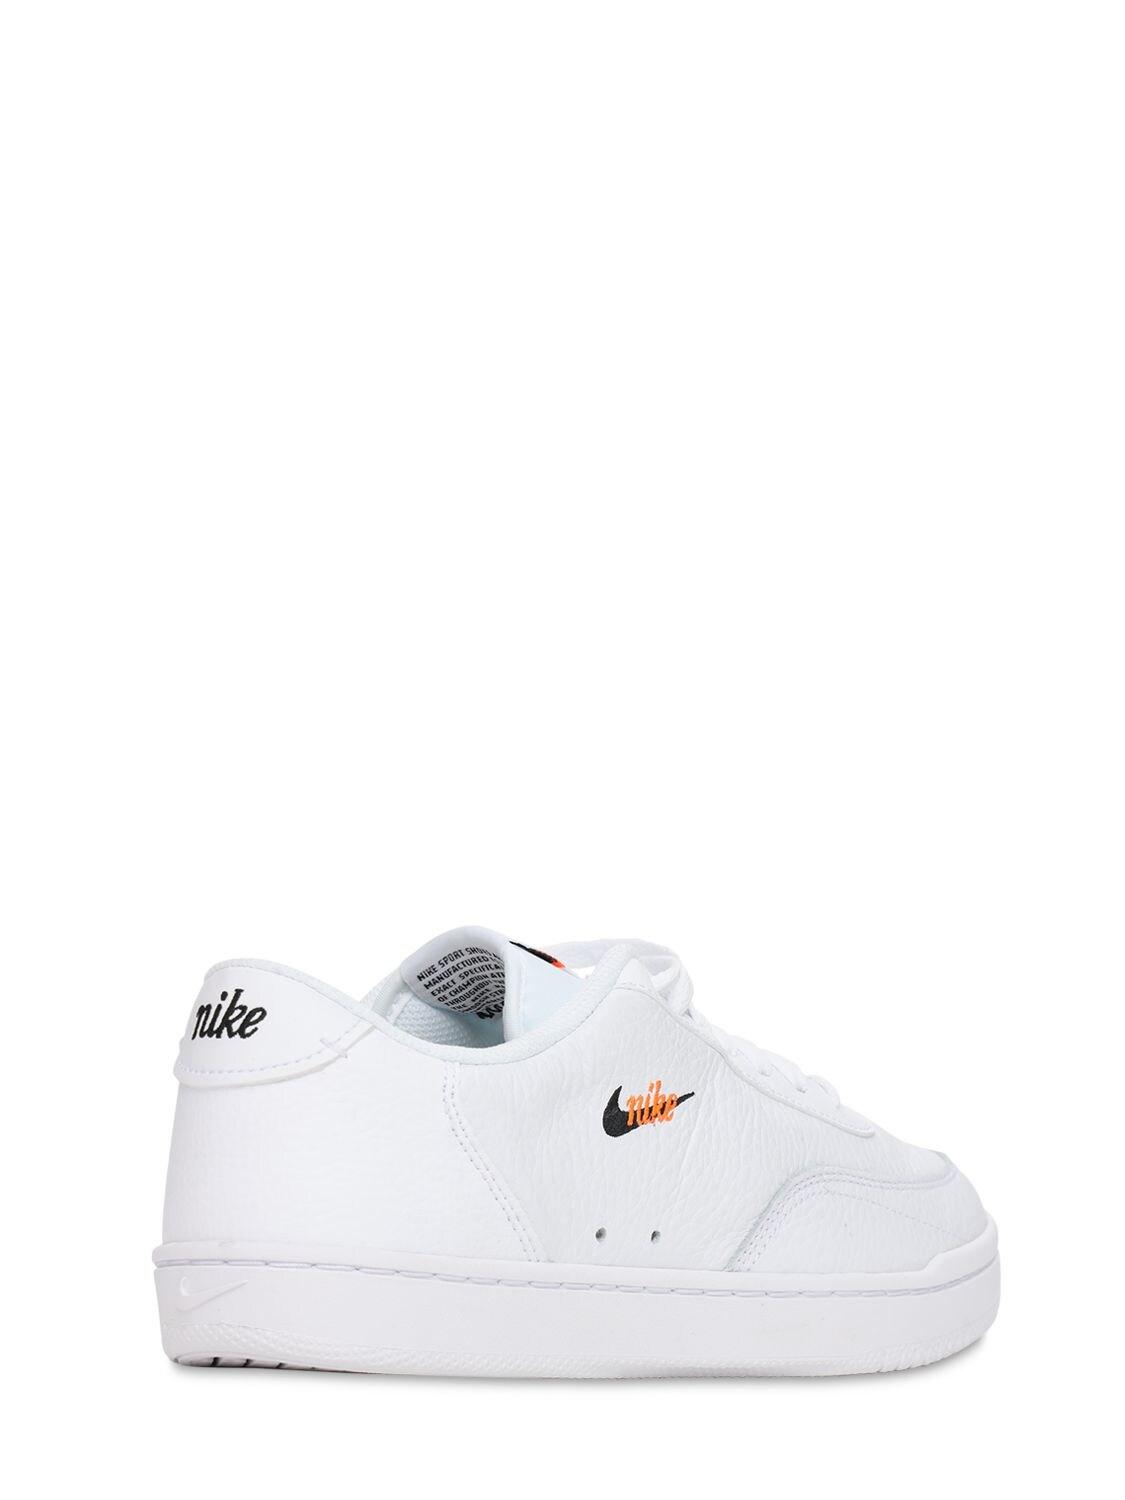 Nike Leather Court Vintage Premium in White - Save 41% | Lyst